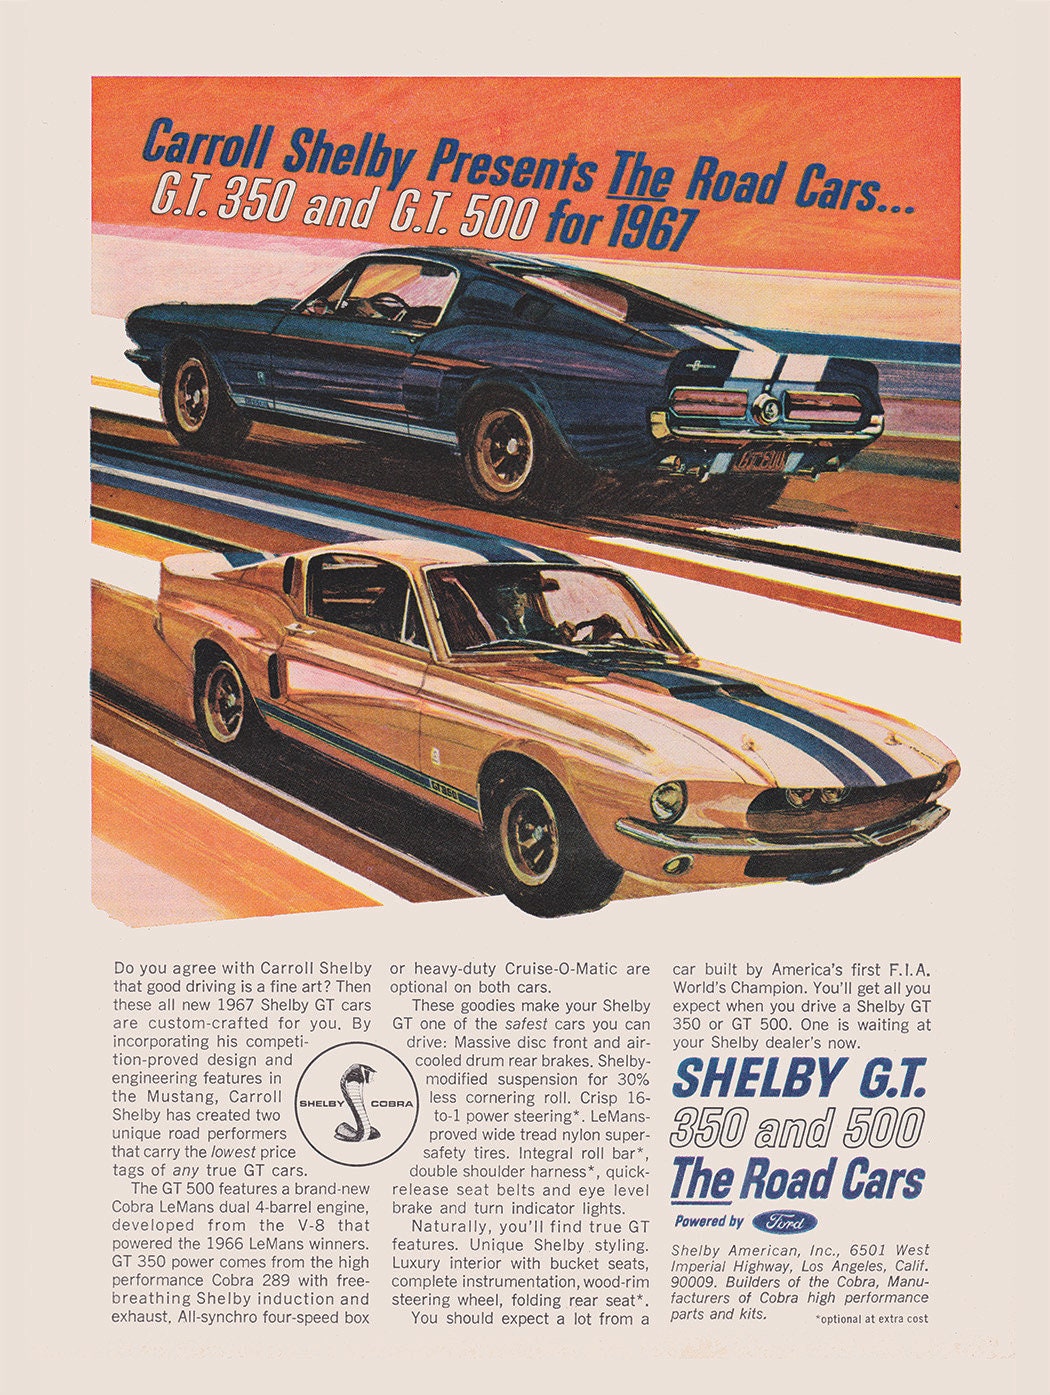 Shelby Mustang GT500 Print Ad Restored and Enlarged Reprint - Etsy